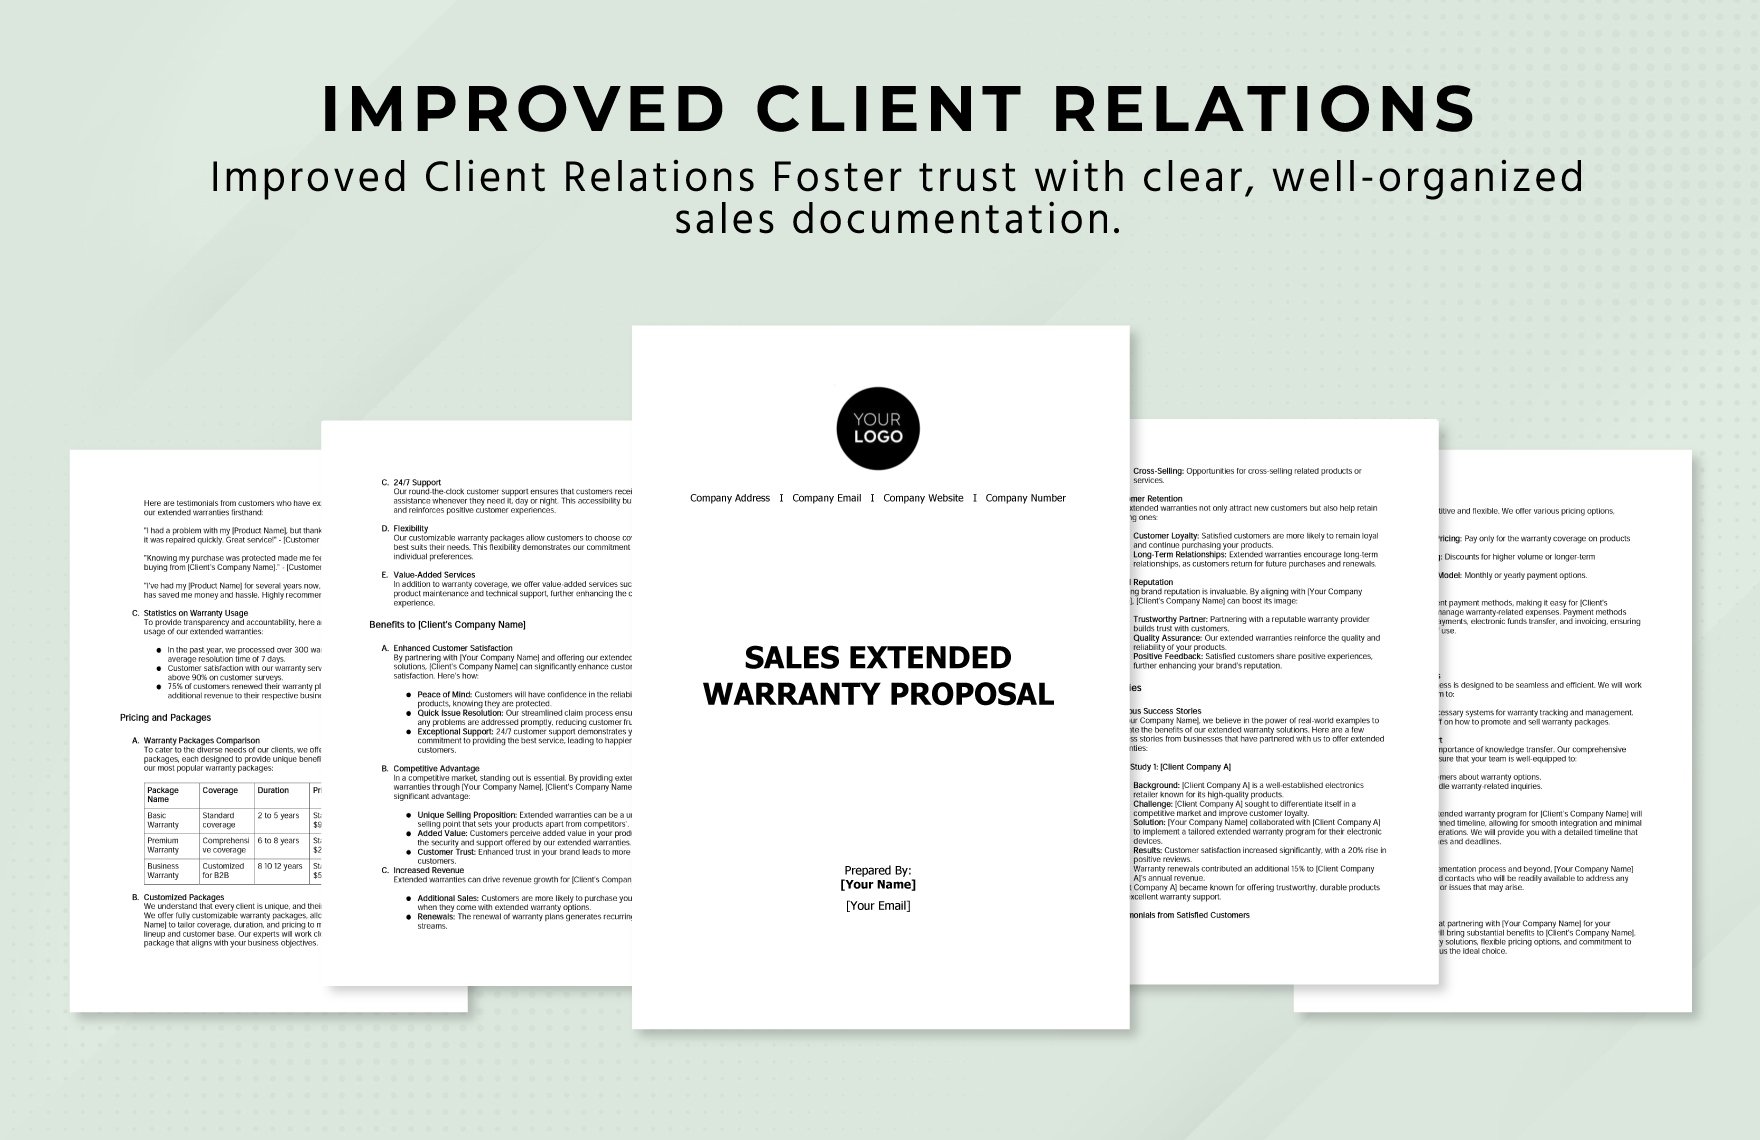 Sales Extended Warranty Proposal Template